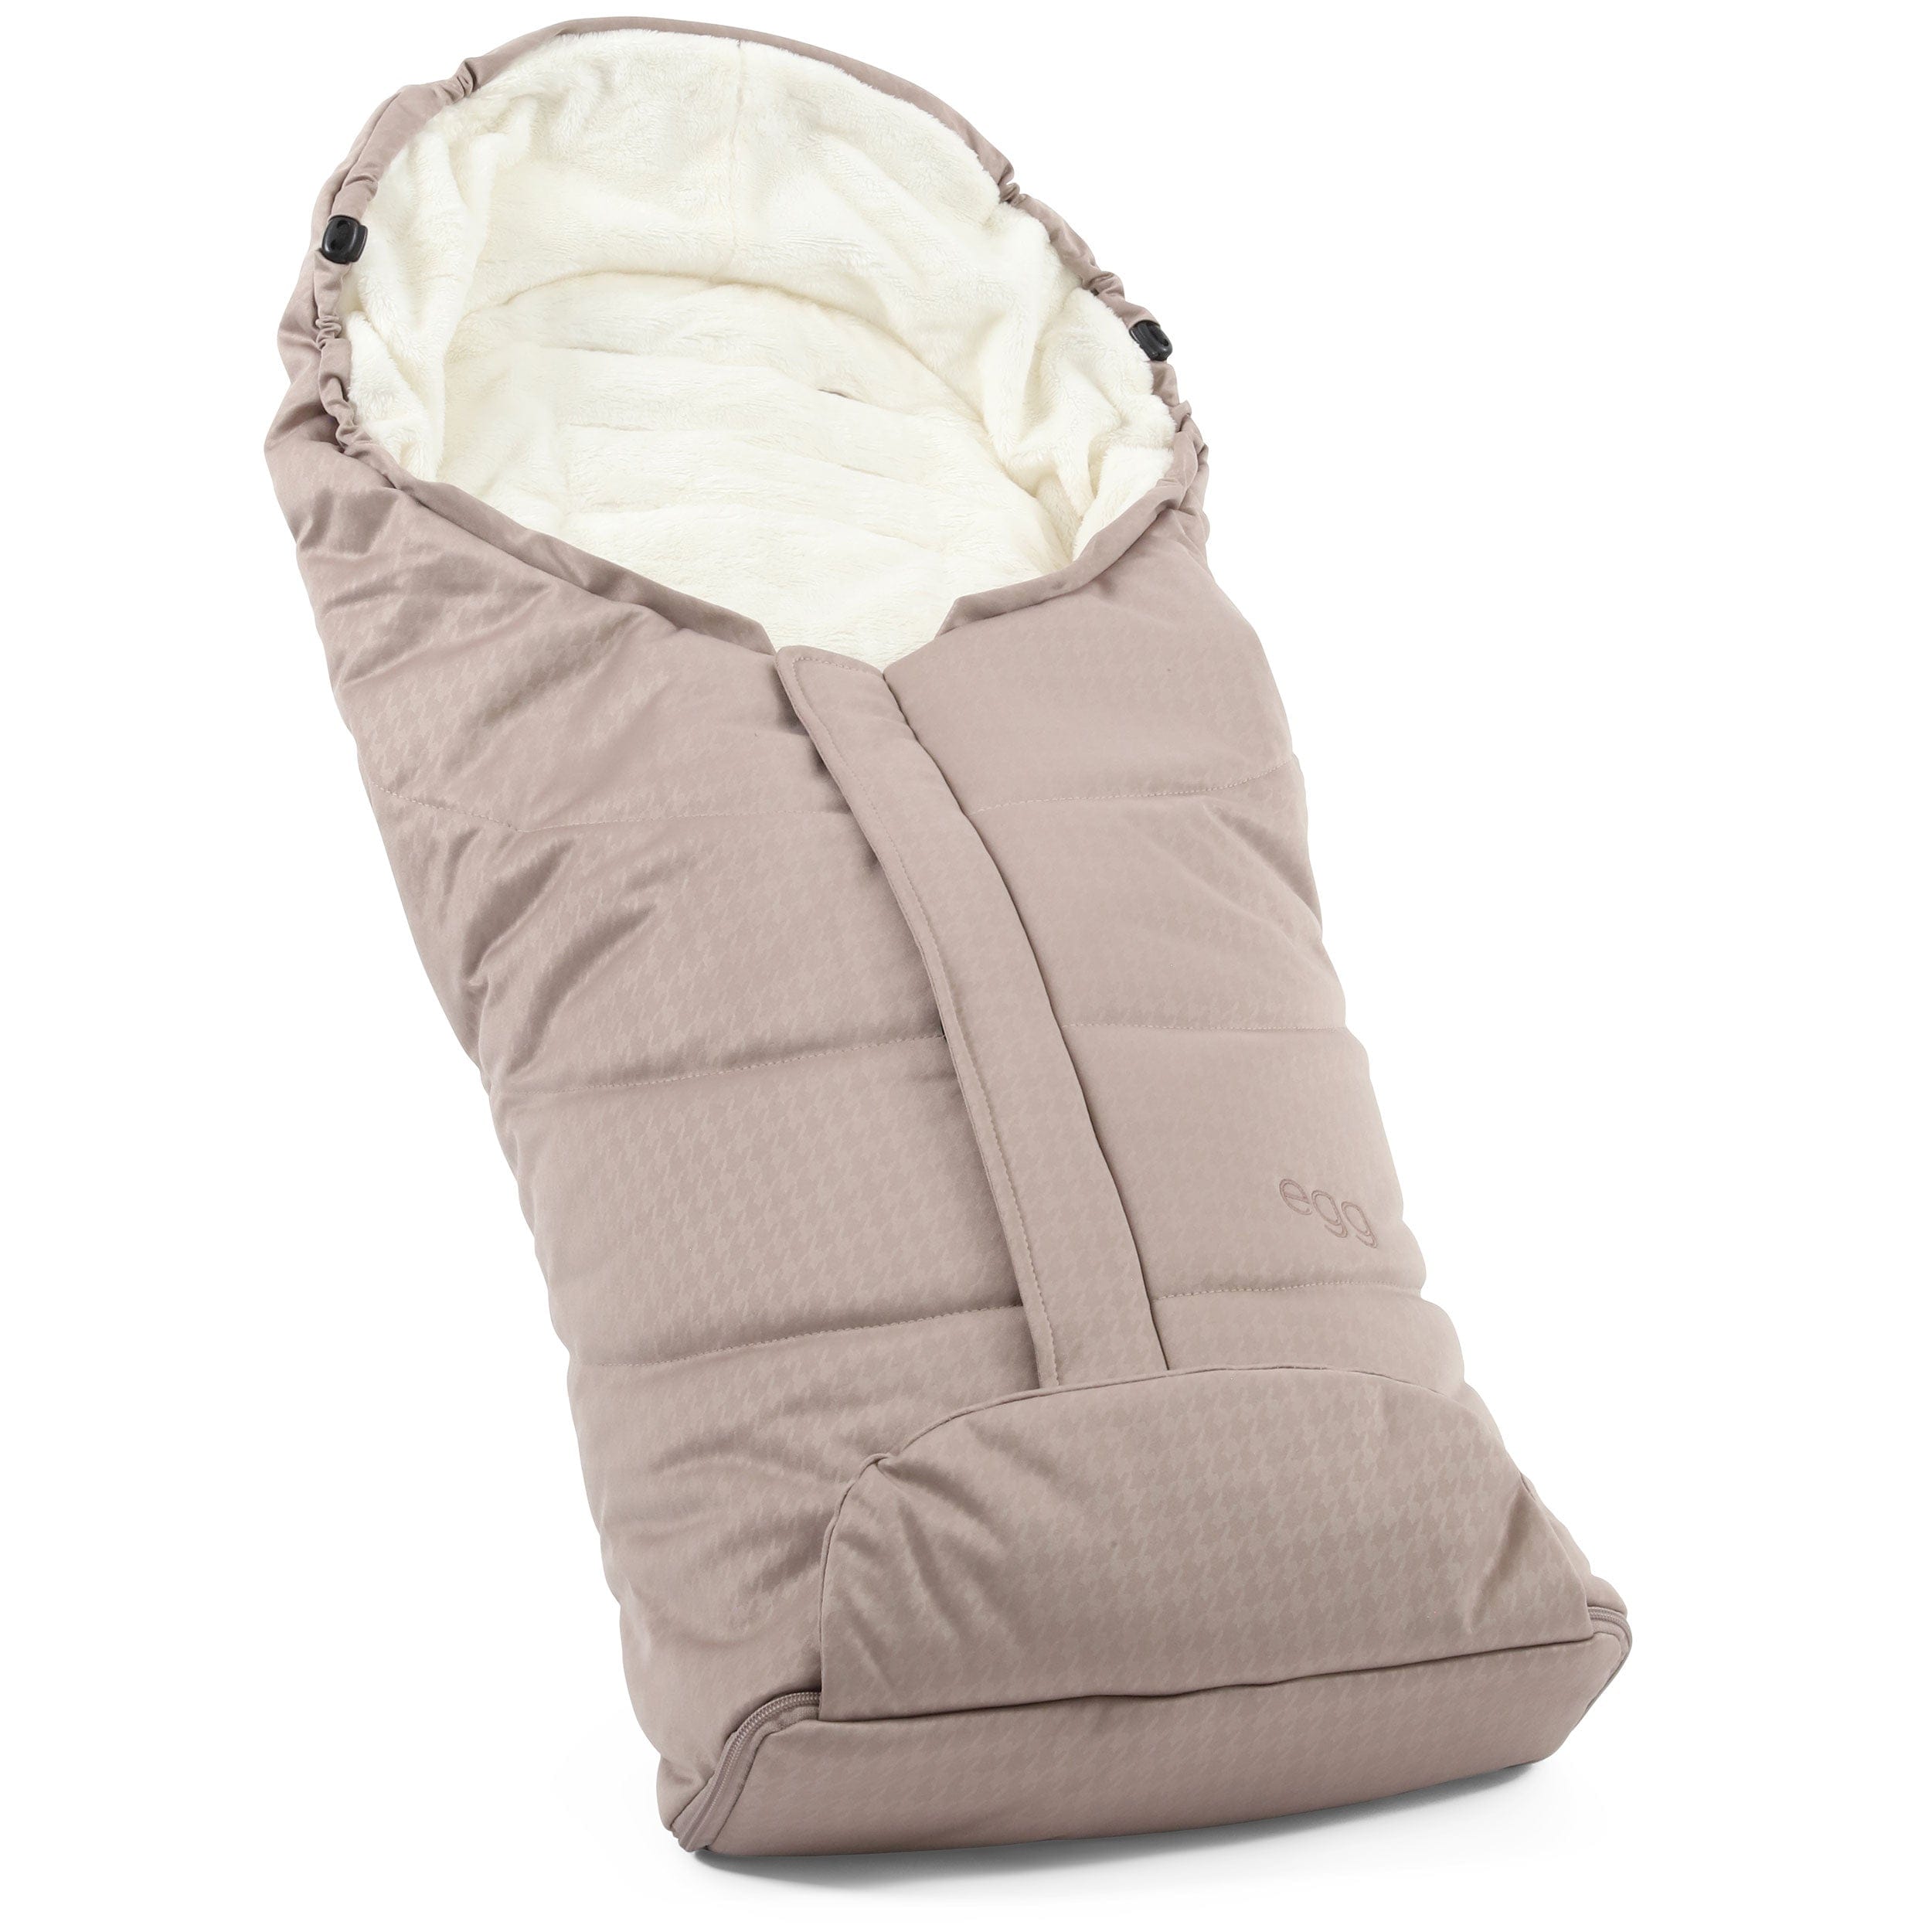 egg3 Footmuff in Houndstooth Almond Footmuffs & Liners E3FMHA 5060711568133